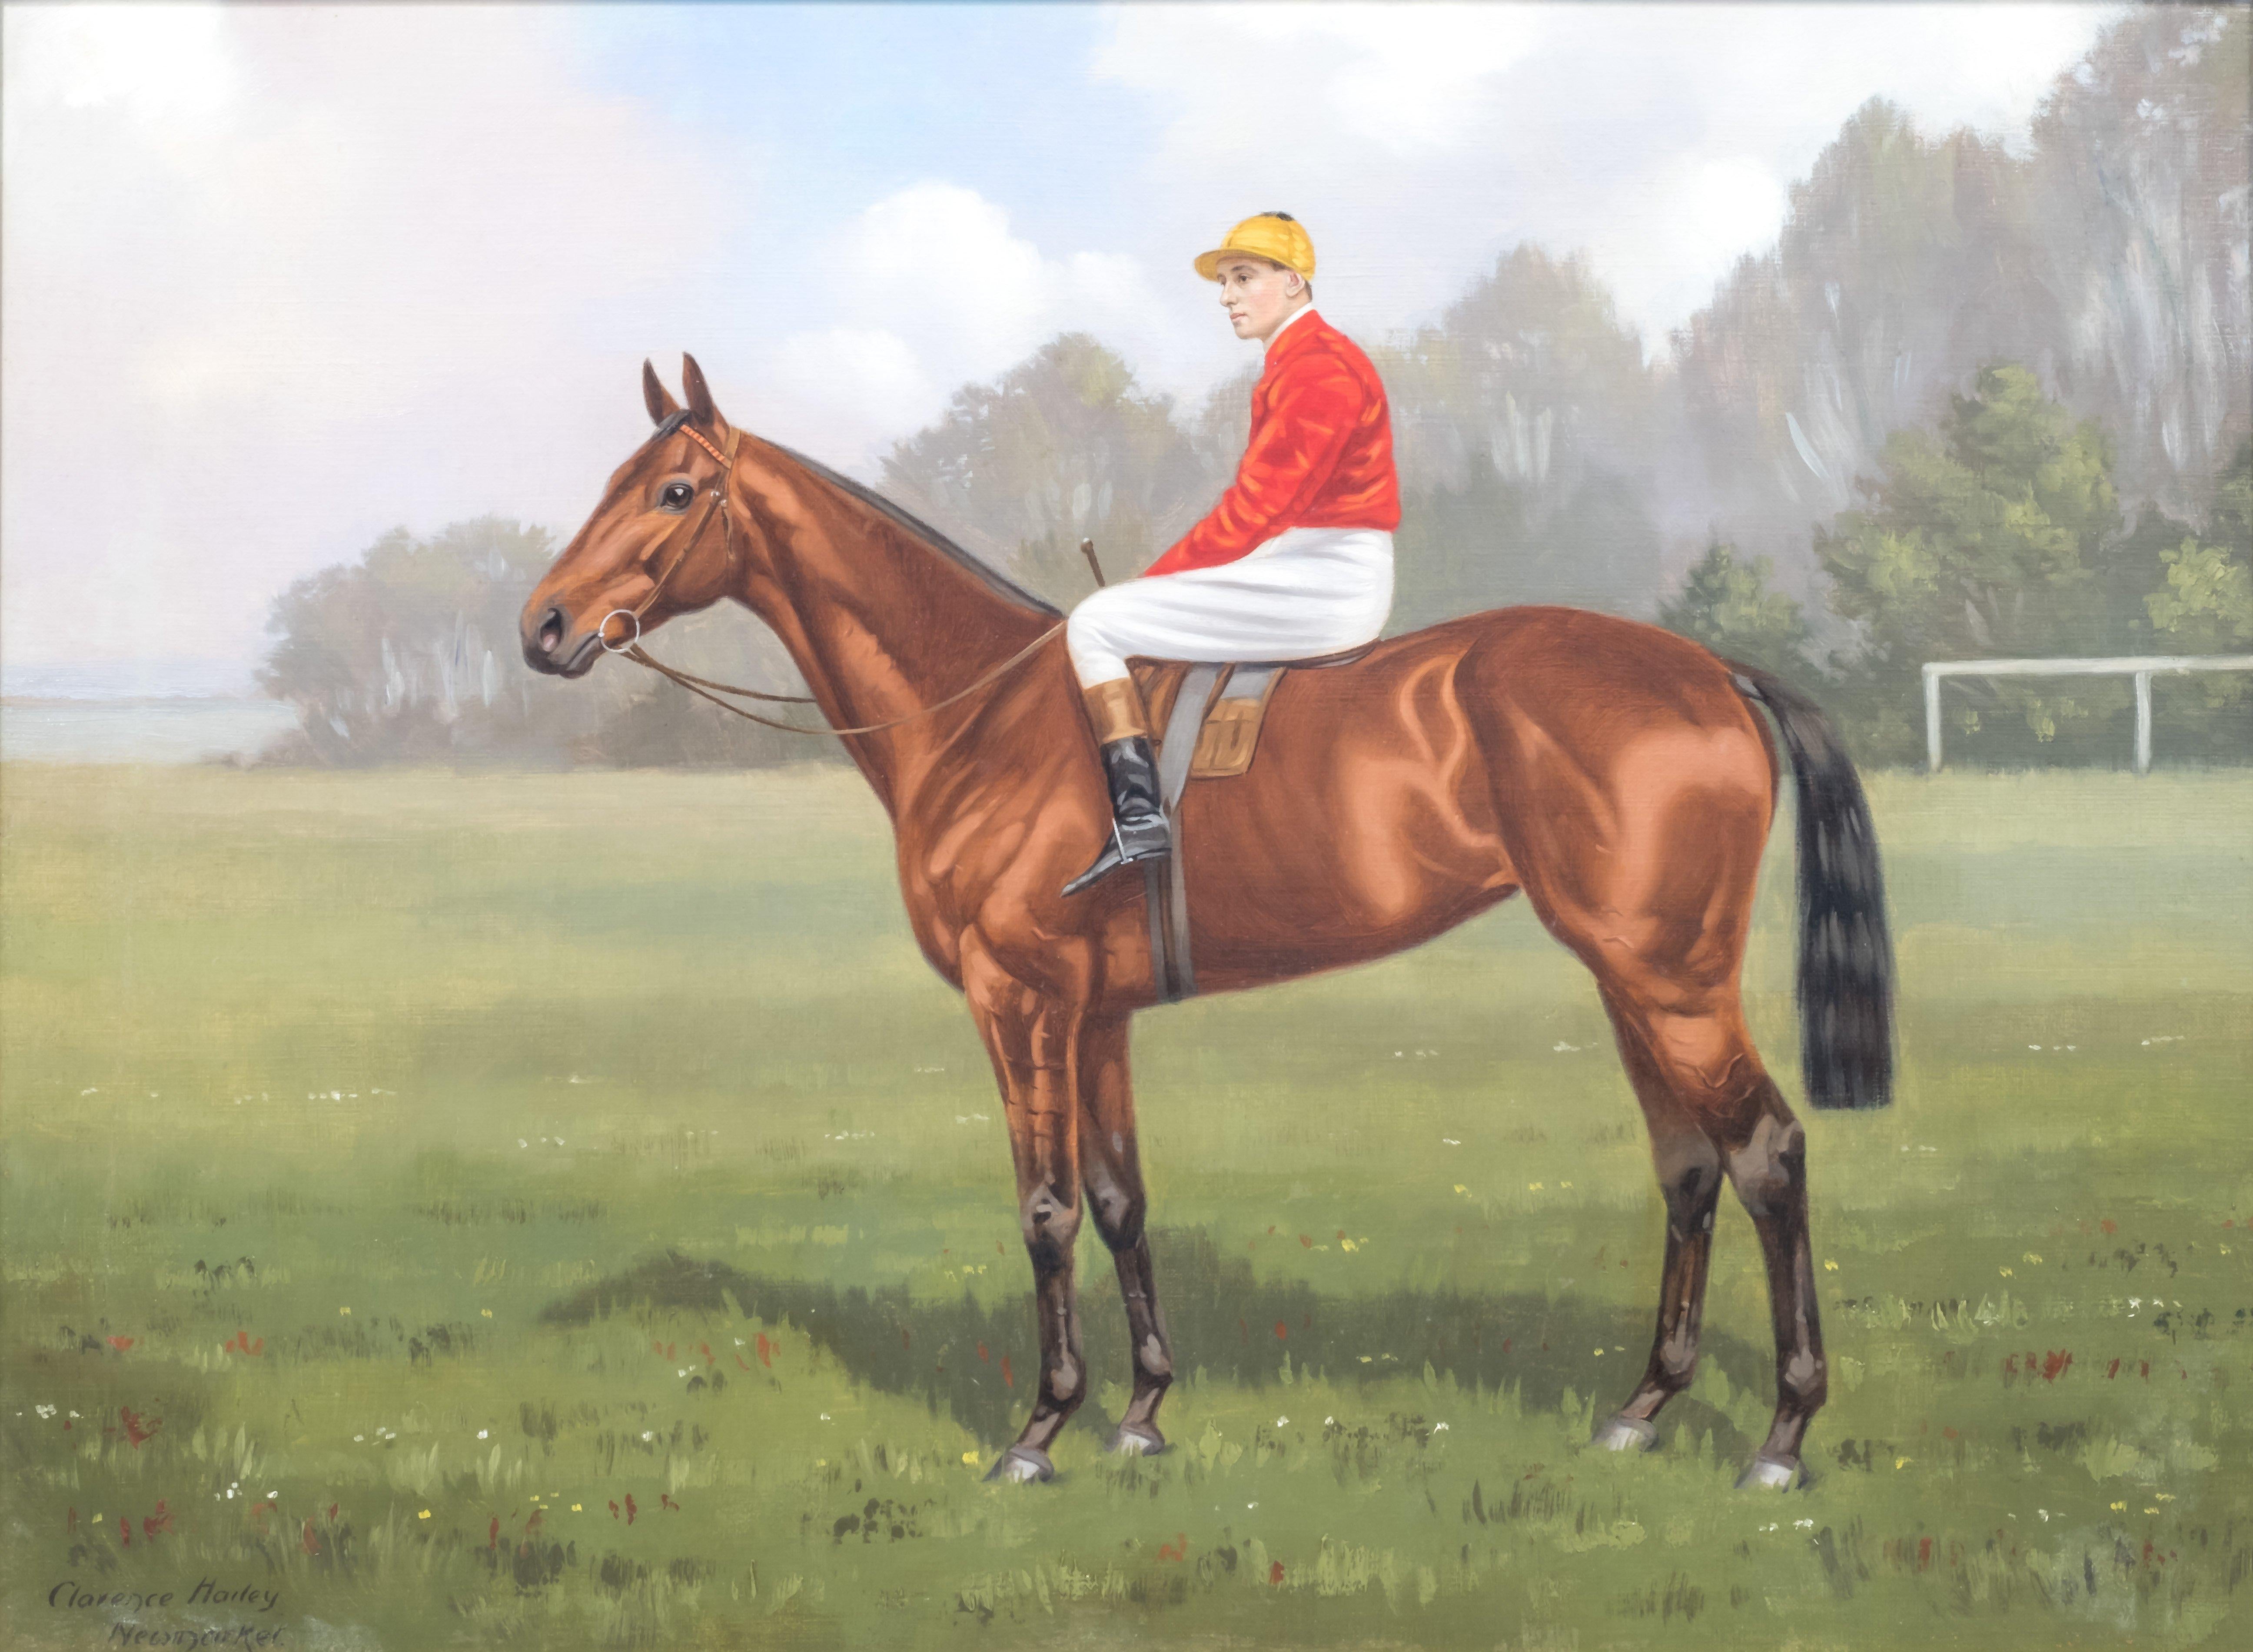 Portrait of jockey and racehorse - Painting by Clarence Hailey